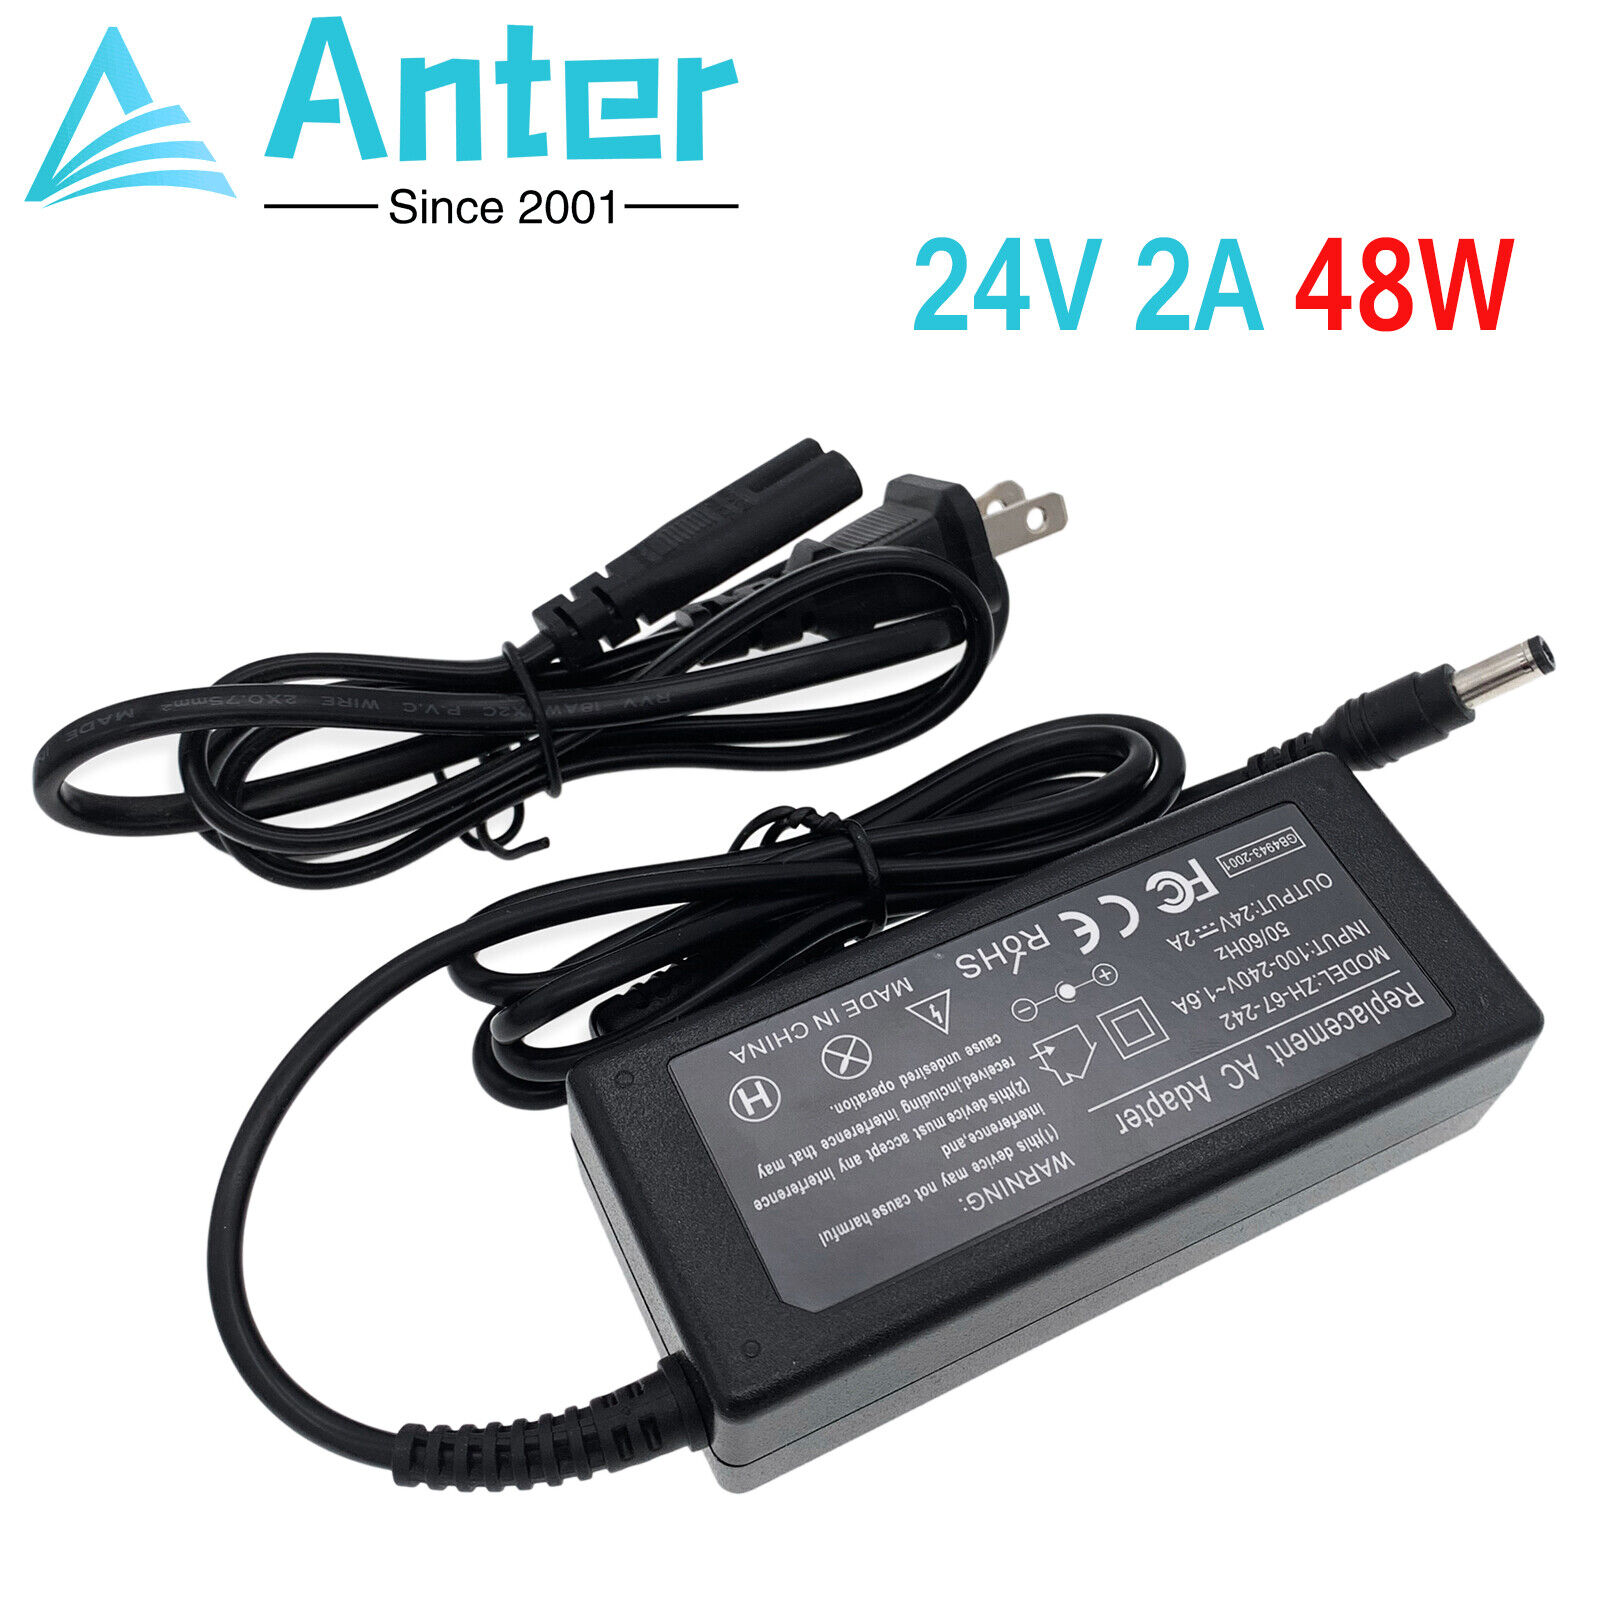 24V 2A AC DC Adapter Power Supply Cord Charger For LCD Monitor Printer 5.5mm Tip